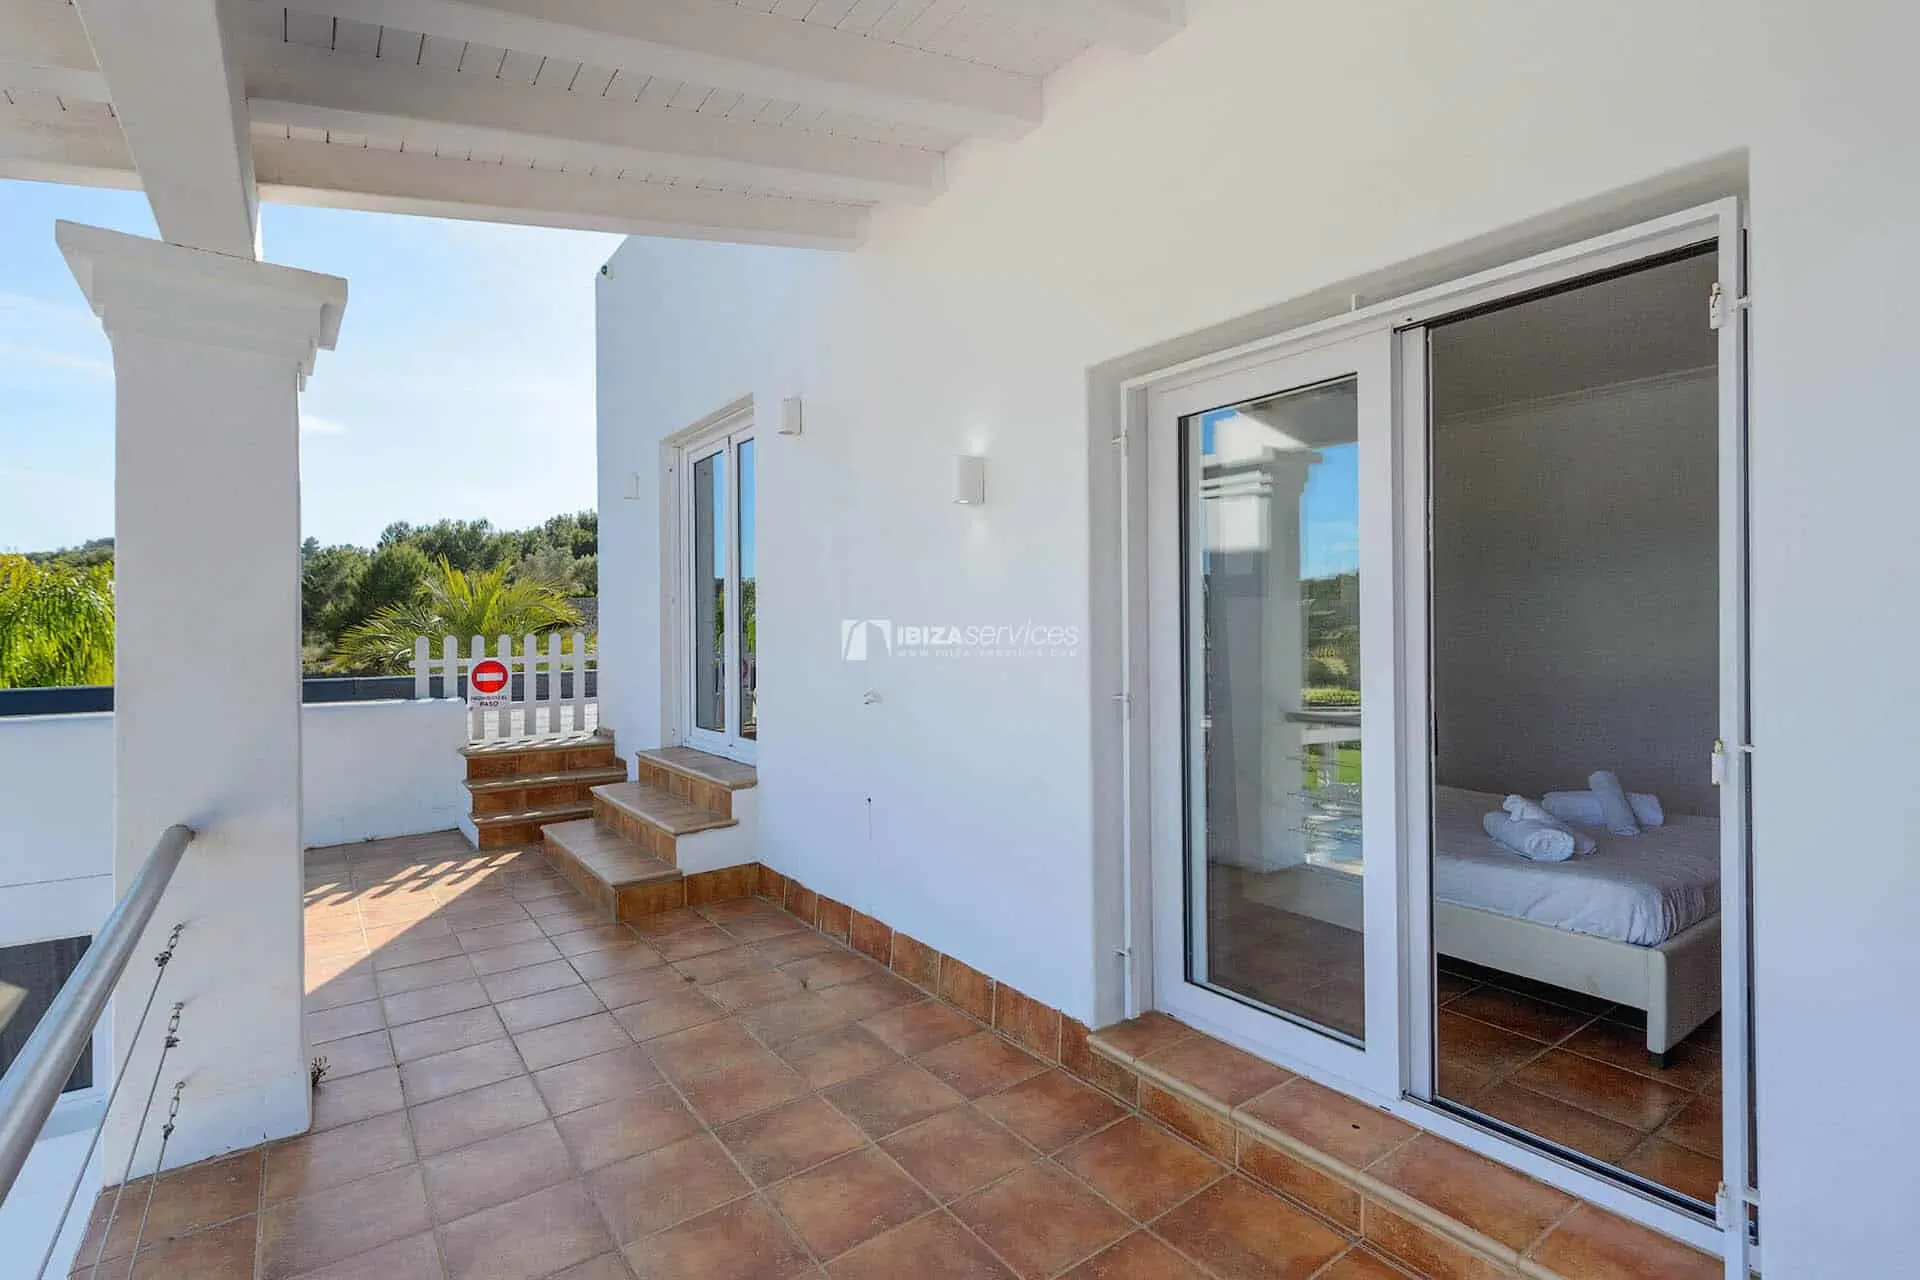 St Eulalia 7 bedroom holiday villa for rent